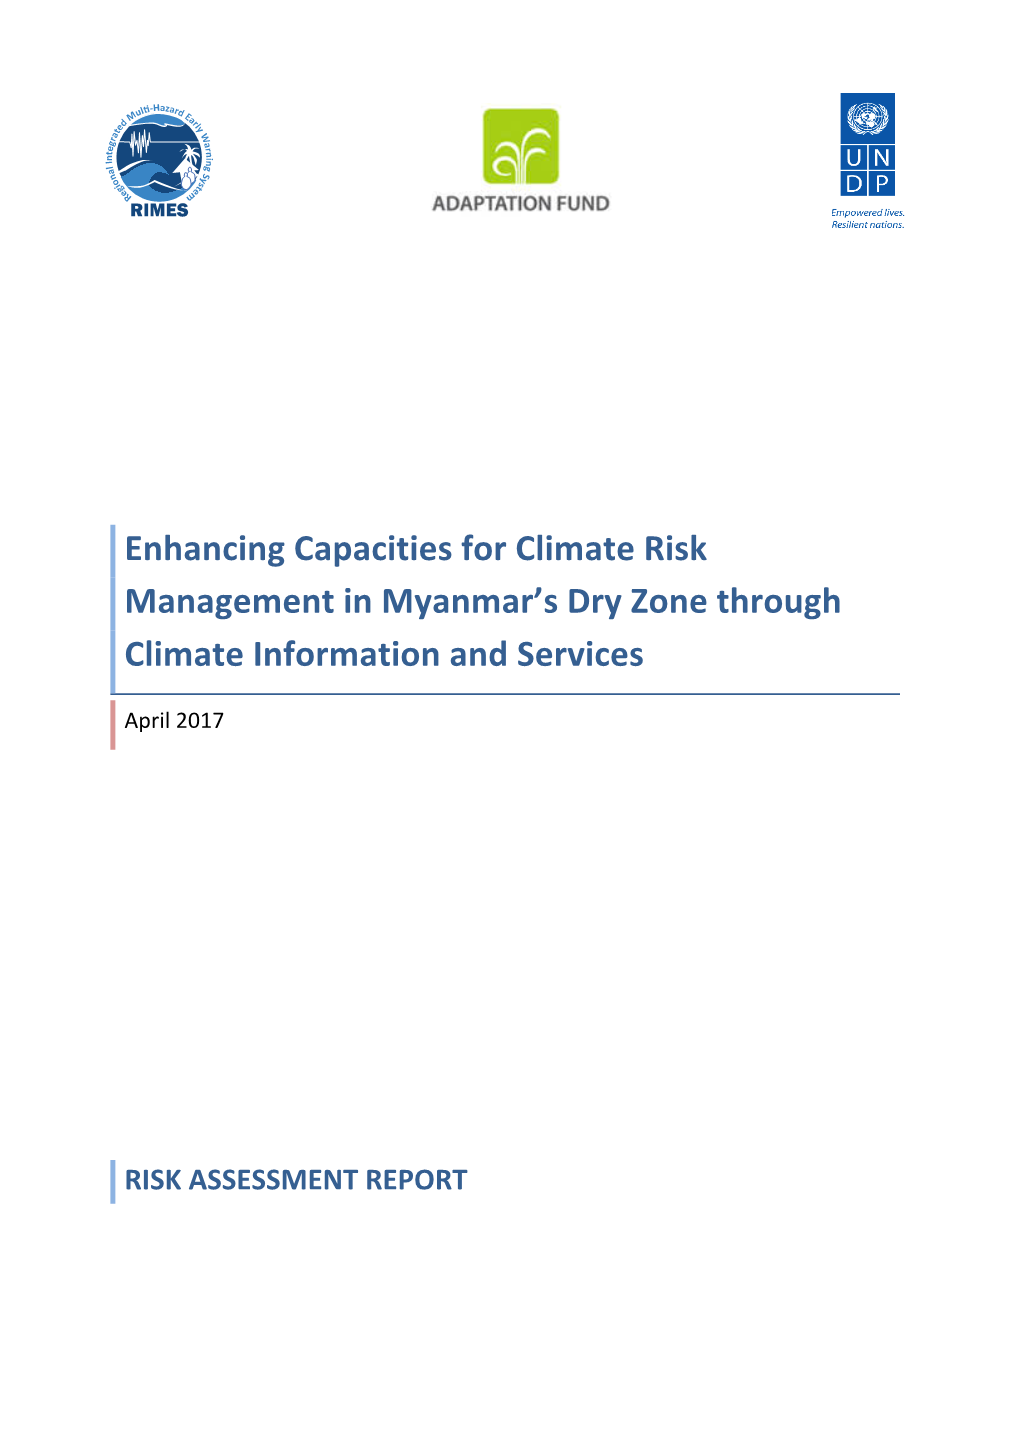 Enhancing Capacities for Climate Risk Management in Myanmar's Dry